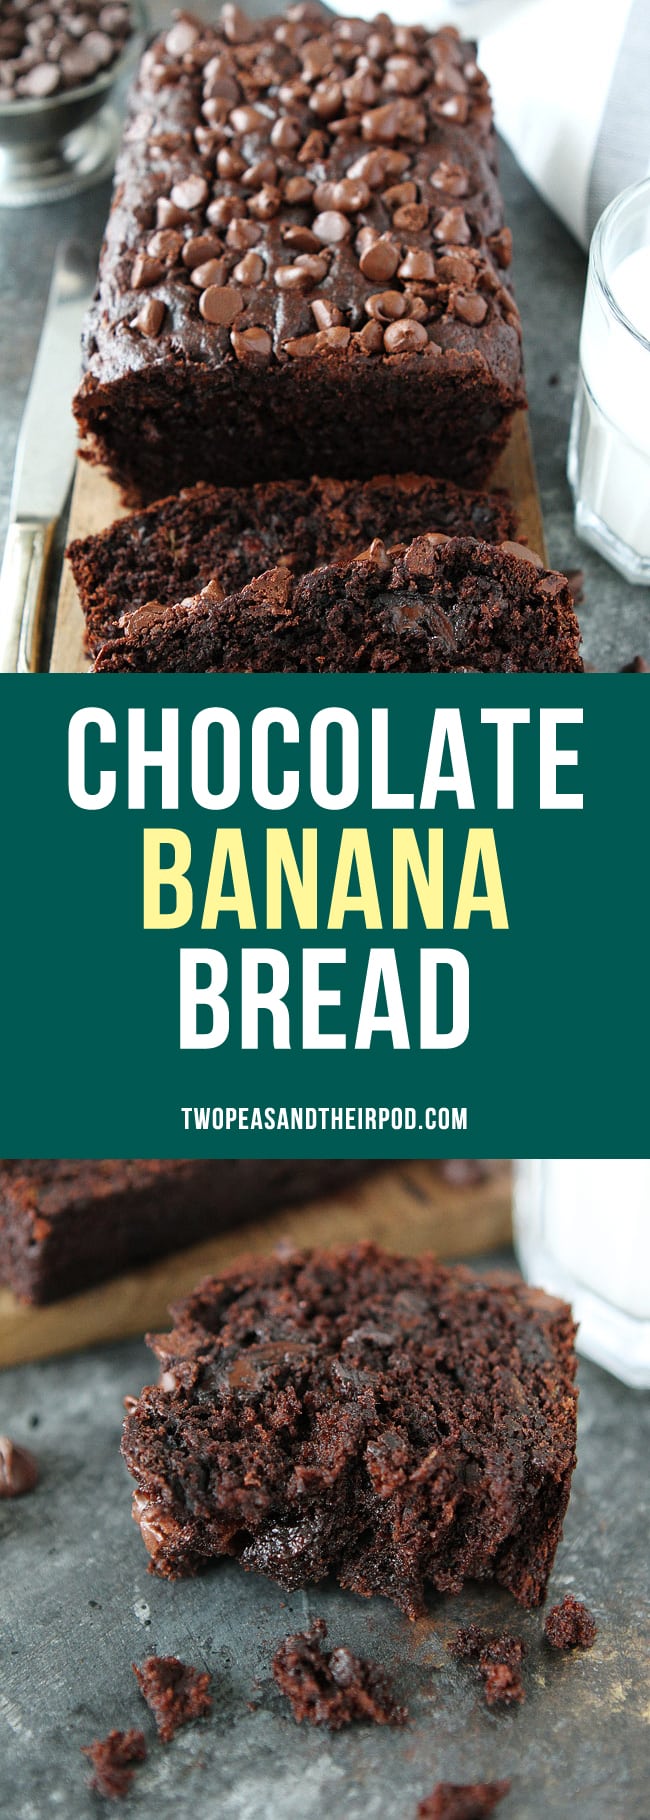 Chocolate Banana Bread is the BEST banana bread recipe! This easy quick bread tastes like chocolate cake! It is so moist and delicious! Everyone LOVES it! #bananabread #chocolate #bread